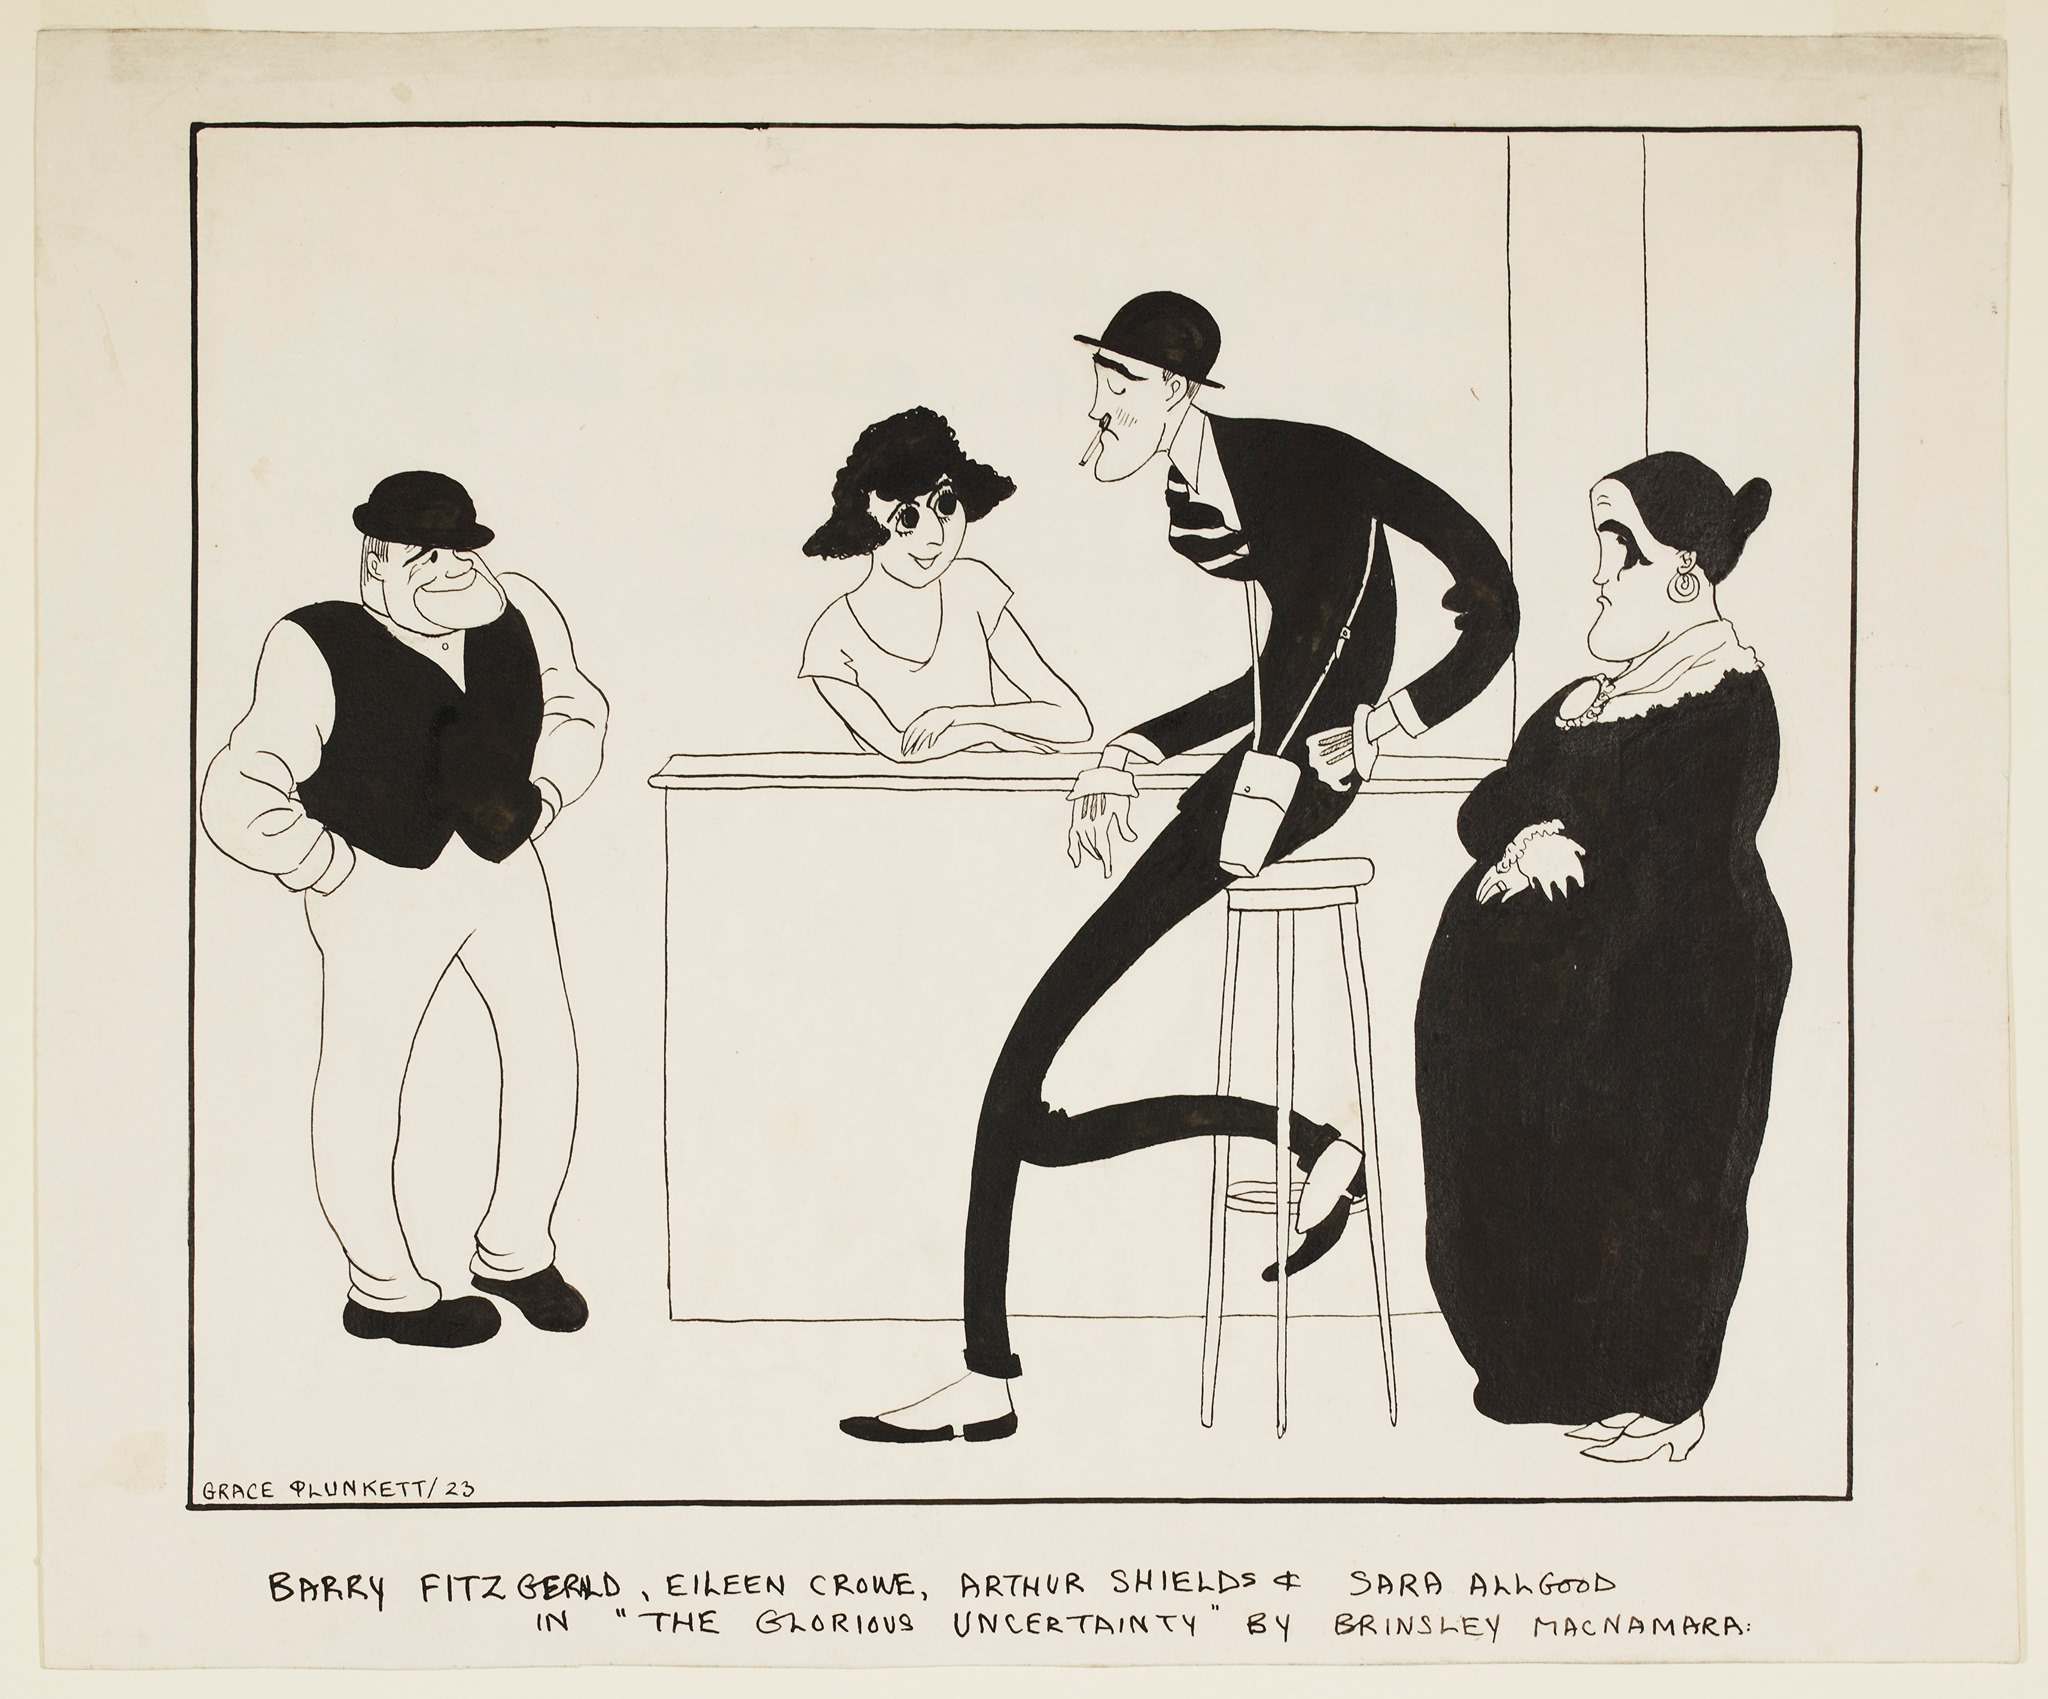 Black and White illustration featuring two women and two men gathered at a bar, drawing by artist Grace Gifford Plunkett, 1923.